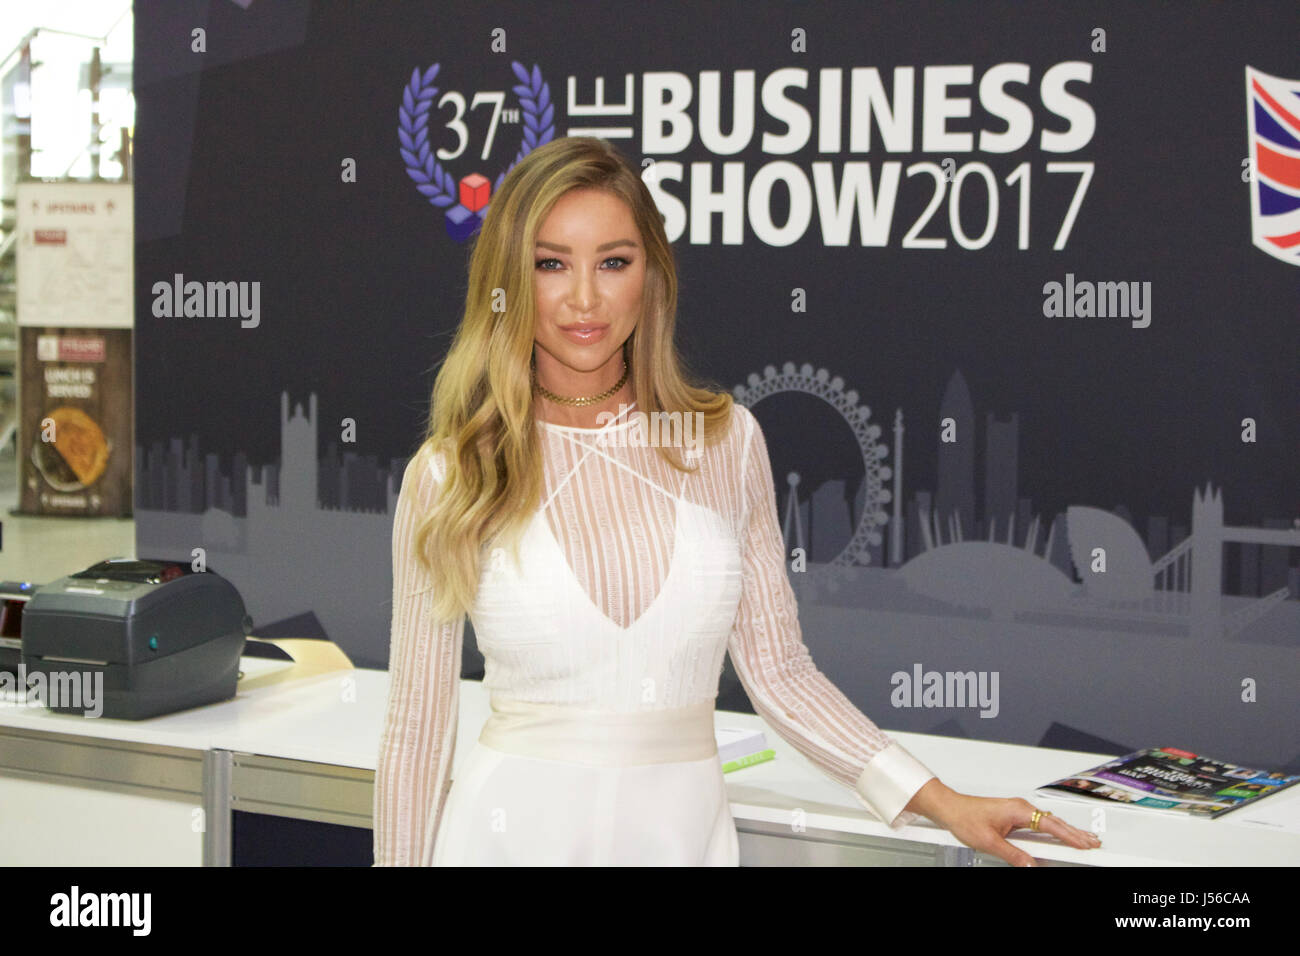 London, UK. 17th May, 2017. Lauren Pope arriving at the Business Show 2017 at Excel Exhibition Centre London where she appears as A keynote speaker. Dressed in a white jumpsuit with mesh detail and split flared legs. As well as a TV star DJ and Model Lauren is a keen entrepreneur who runs her own hair extension business. Credit: Ayeesha Walsh/Alamy Live News Stock Photo